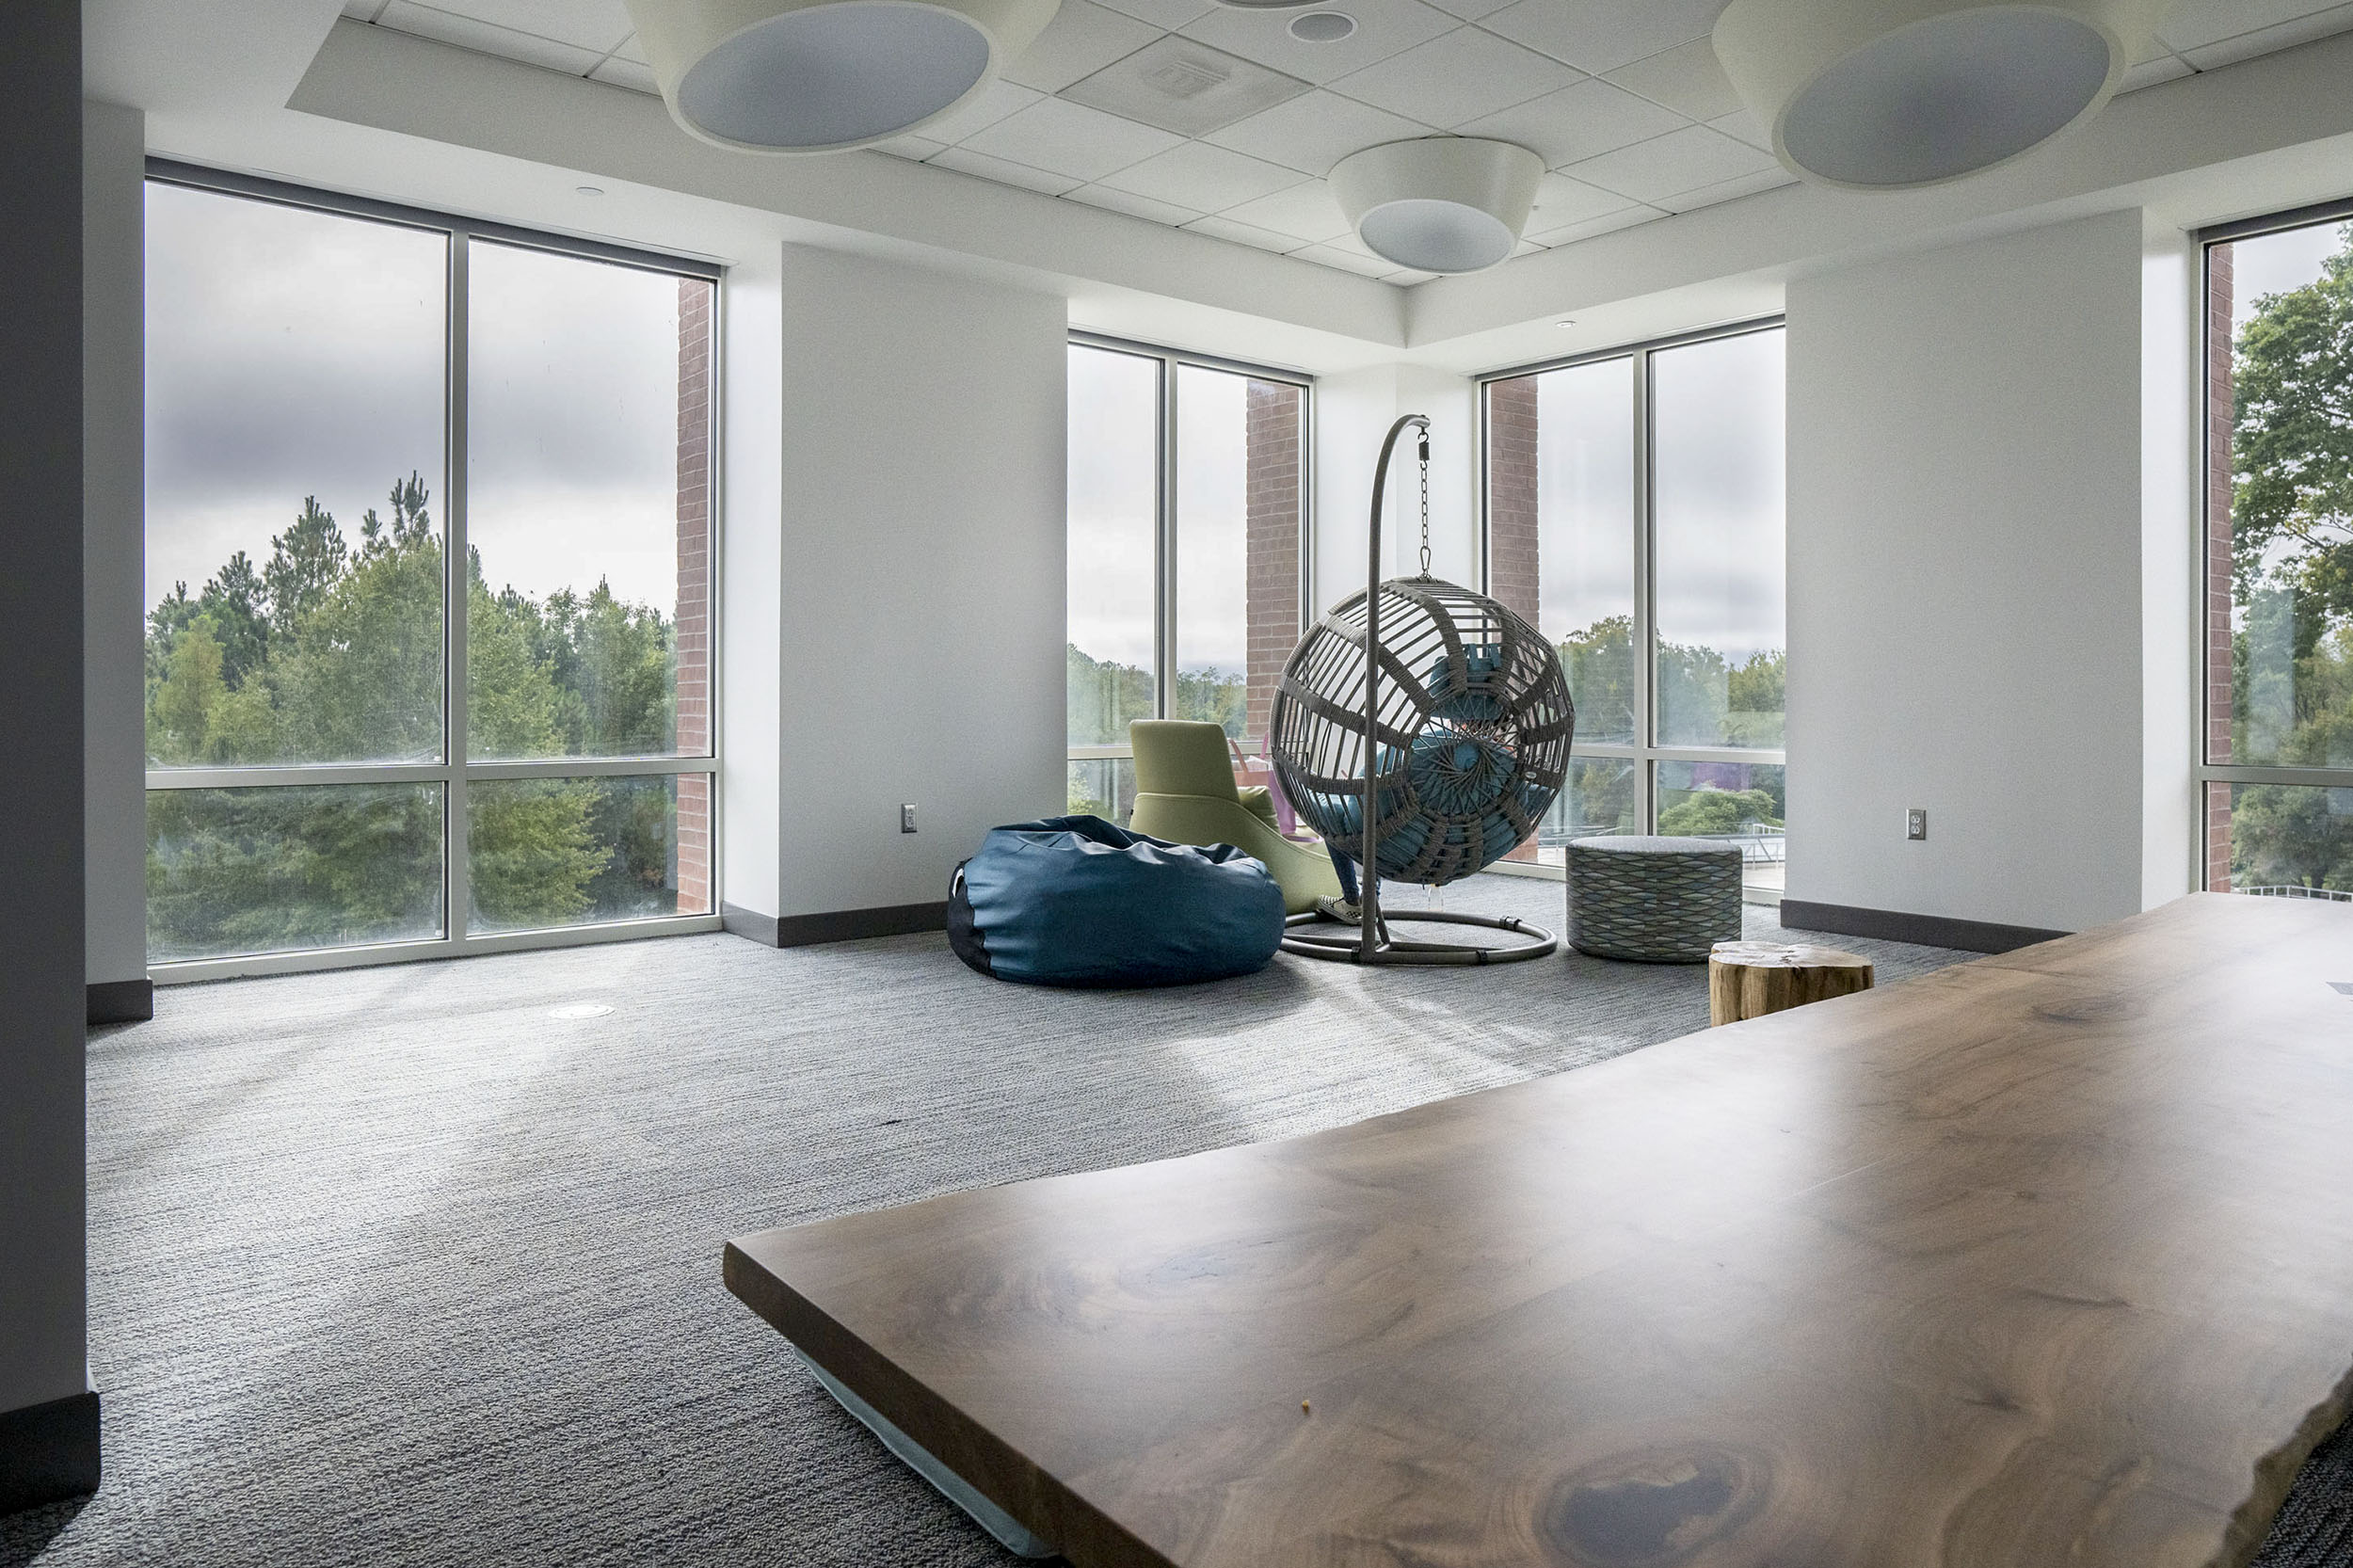 Room in the Student Health and Wellness center with a table, bean bag chair, hammock chair, and yoga mats